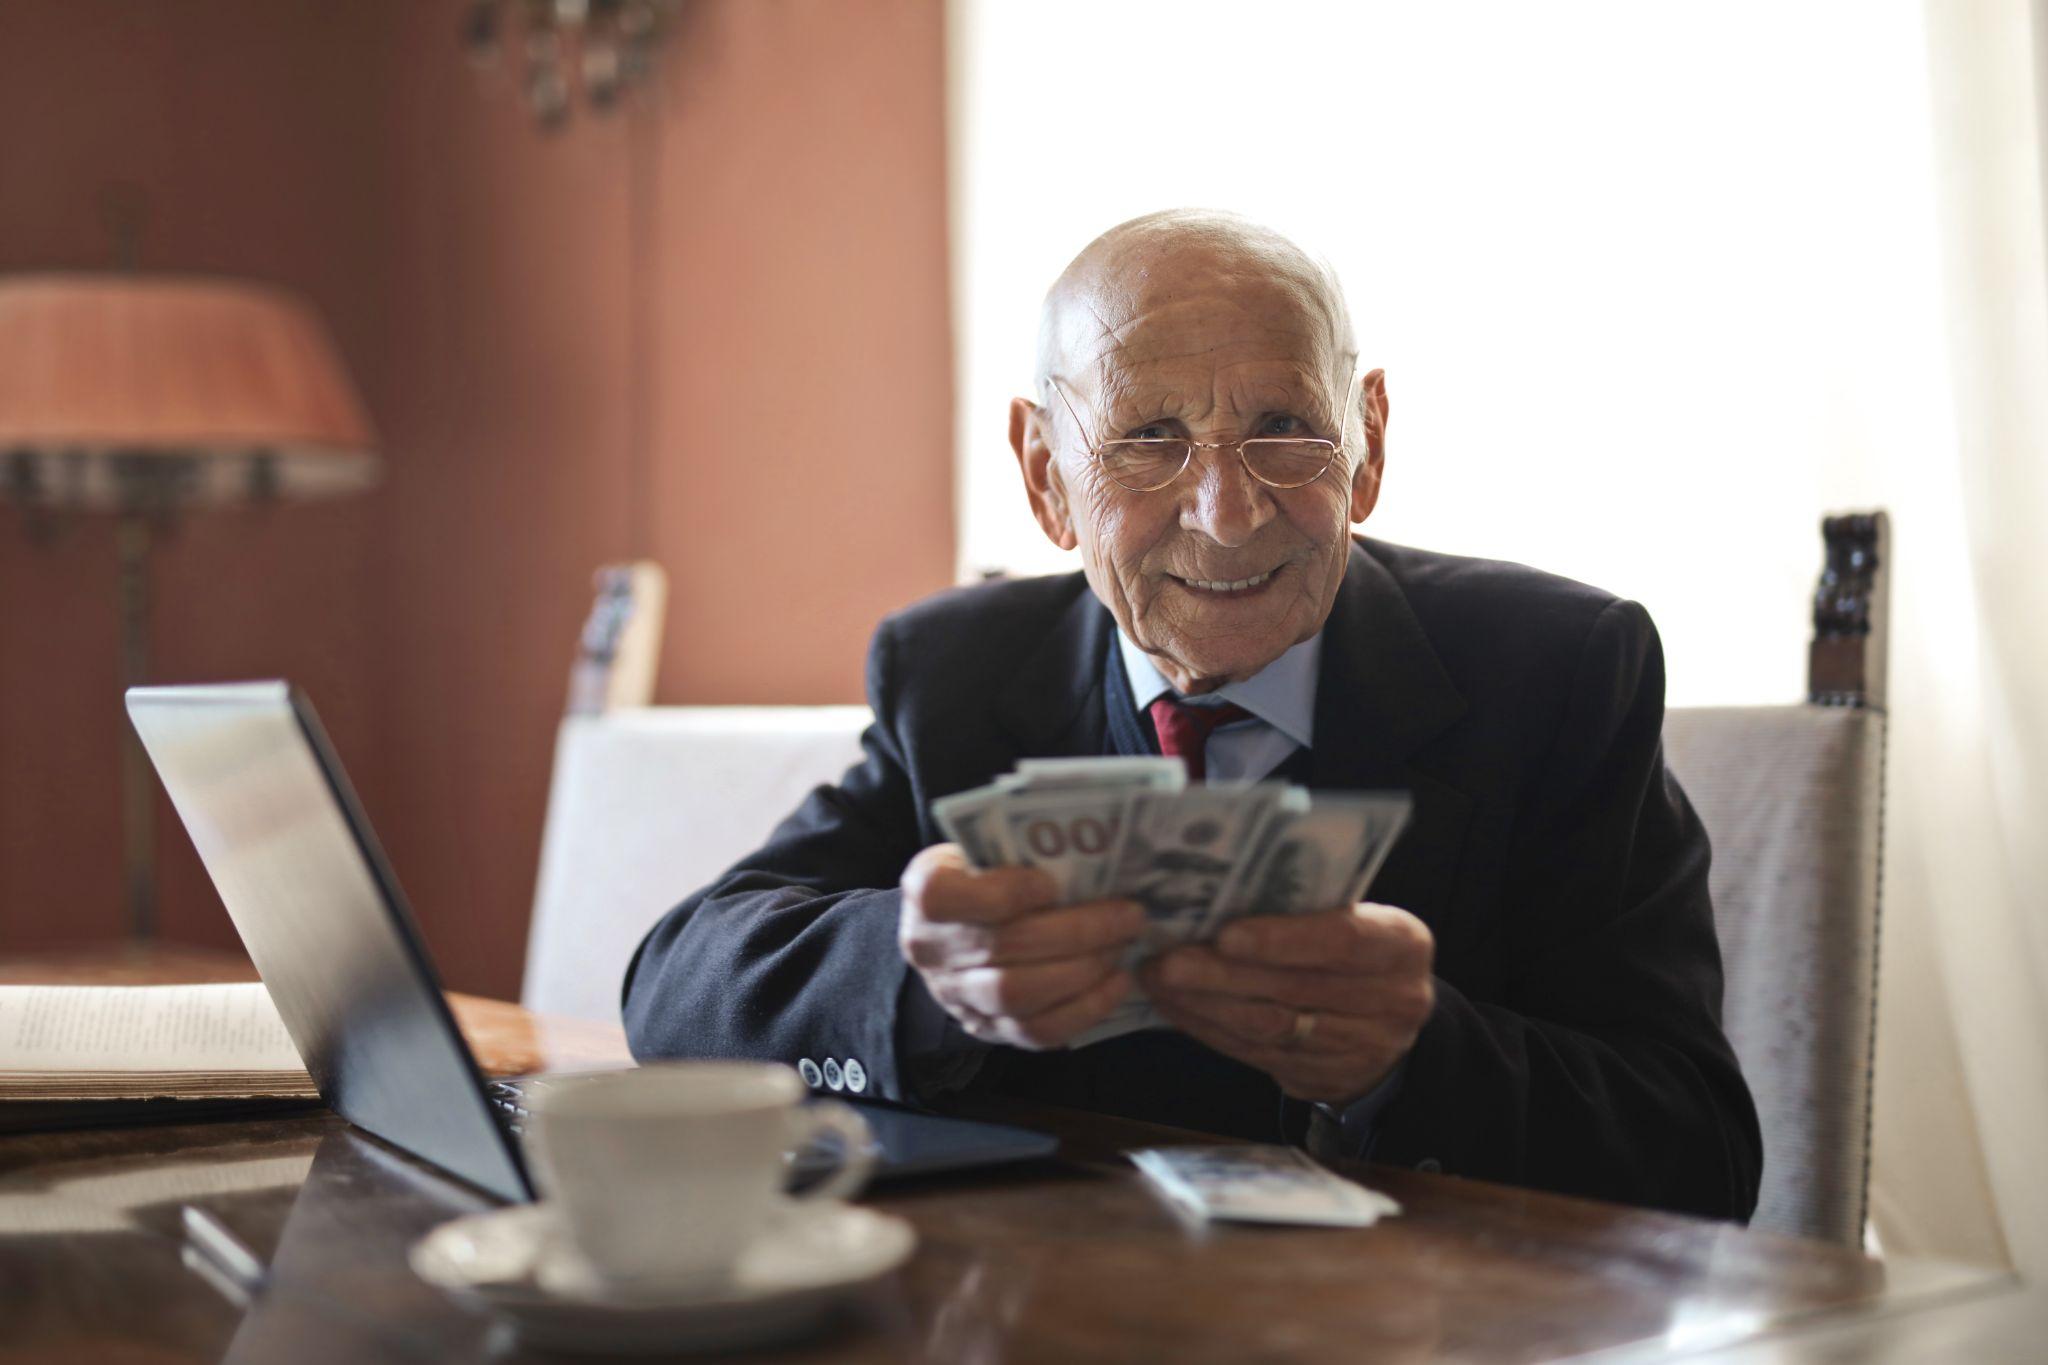 Old rich man in a suit holding $100 bills in his hand and smiling at an office desk.